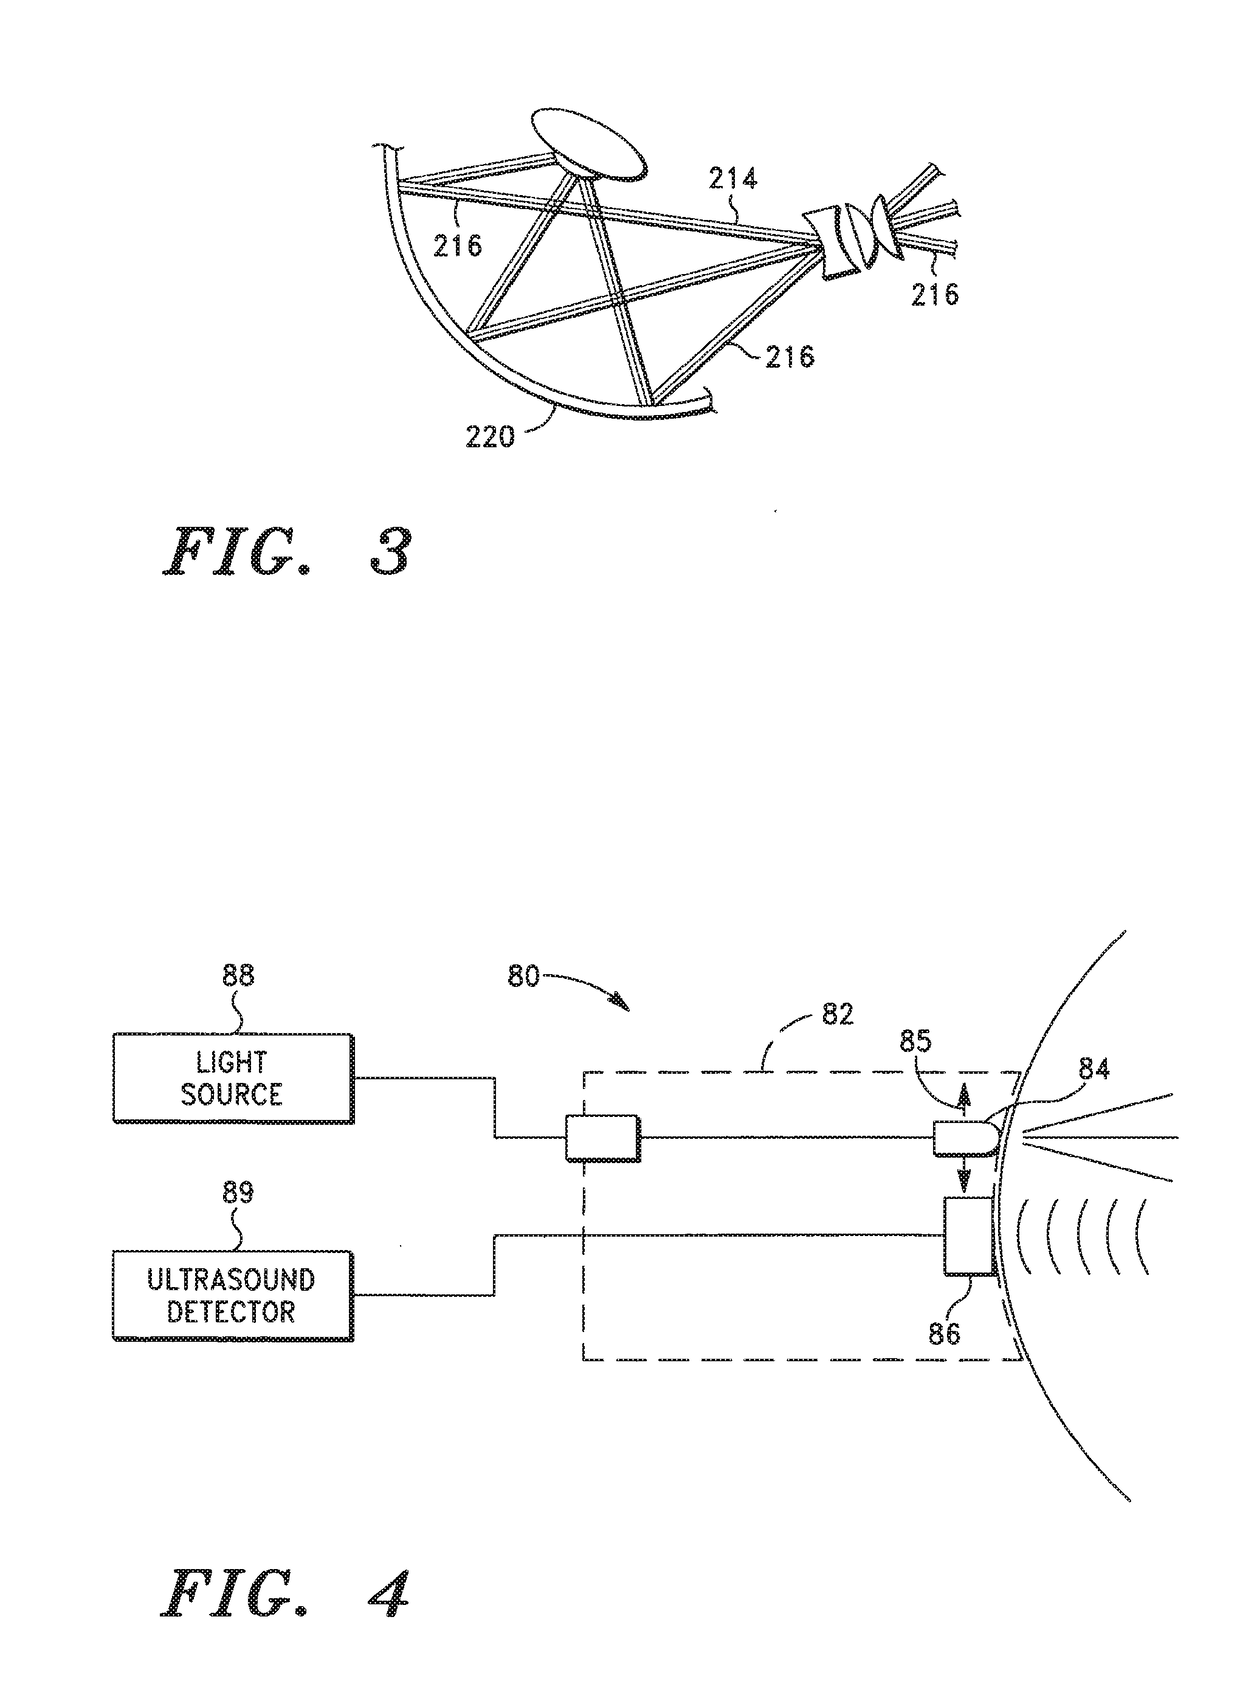 Remote Laser Treatment System With Dynamic Imaging